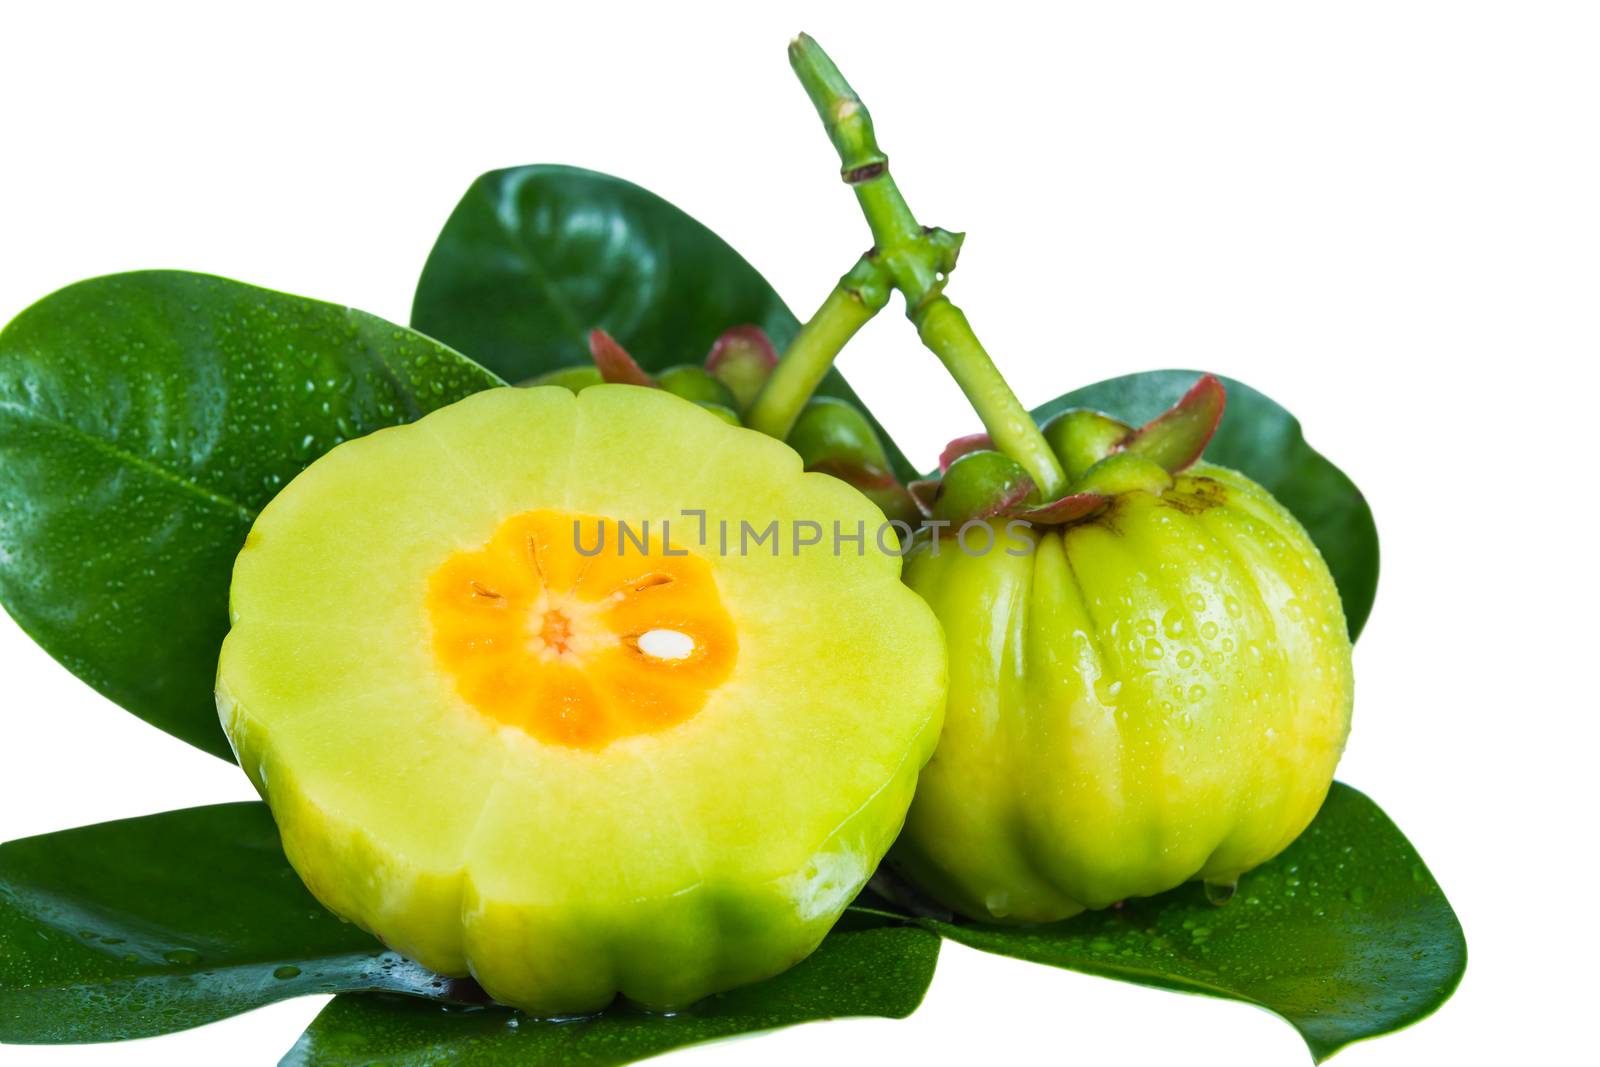 Close up garcinia atroviridis fresh fruit on leaves. Isolated on white background. Thai herb and sour flavor lots of vitamin C for good health. Extract as a weight loss product.